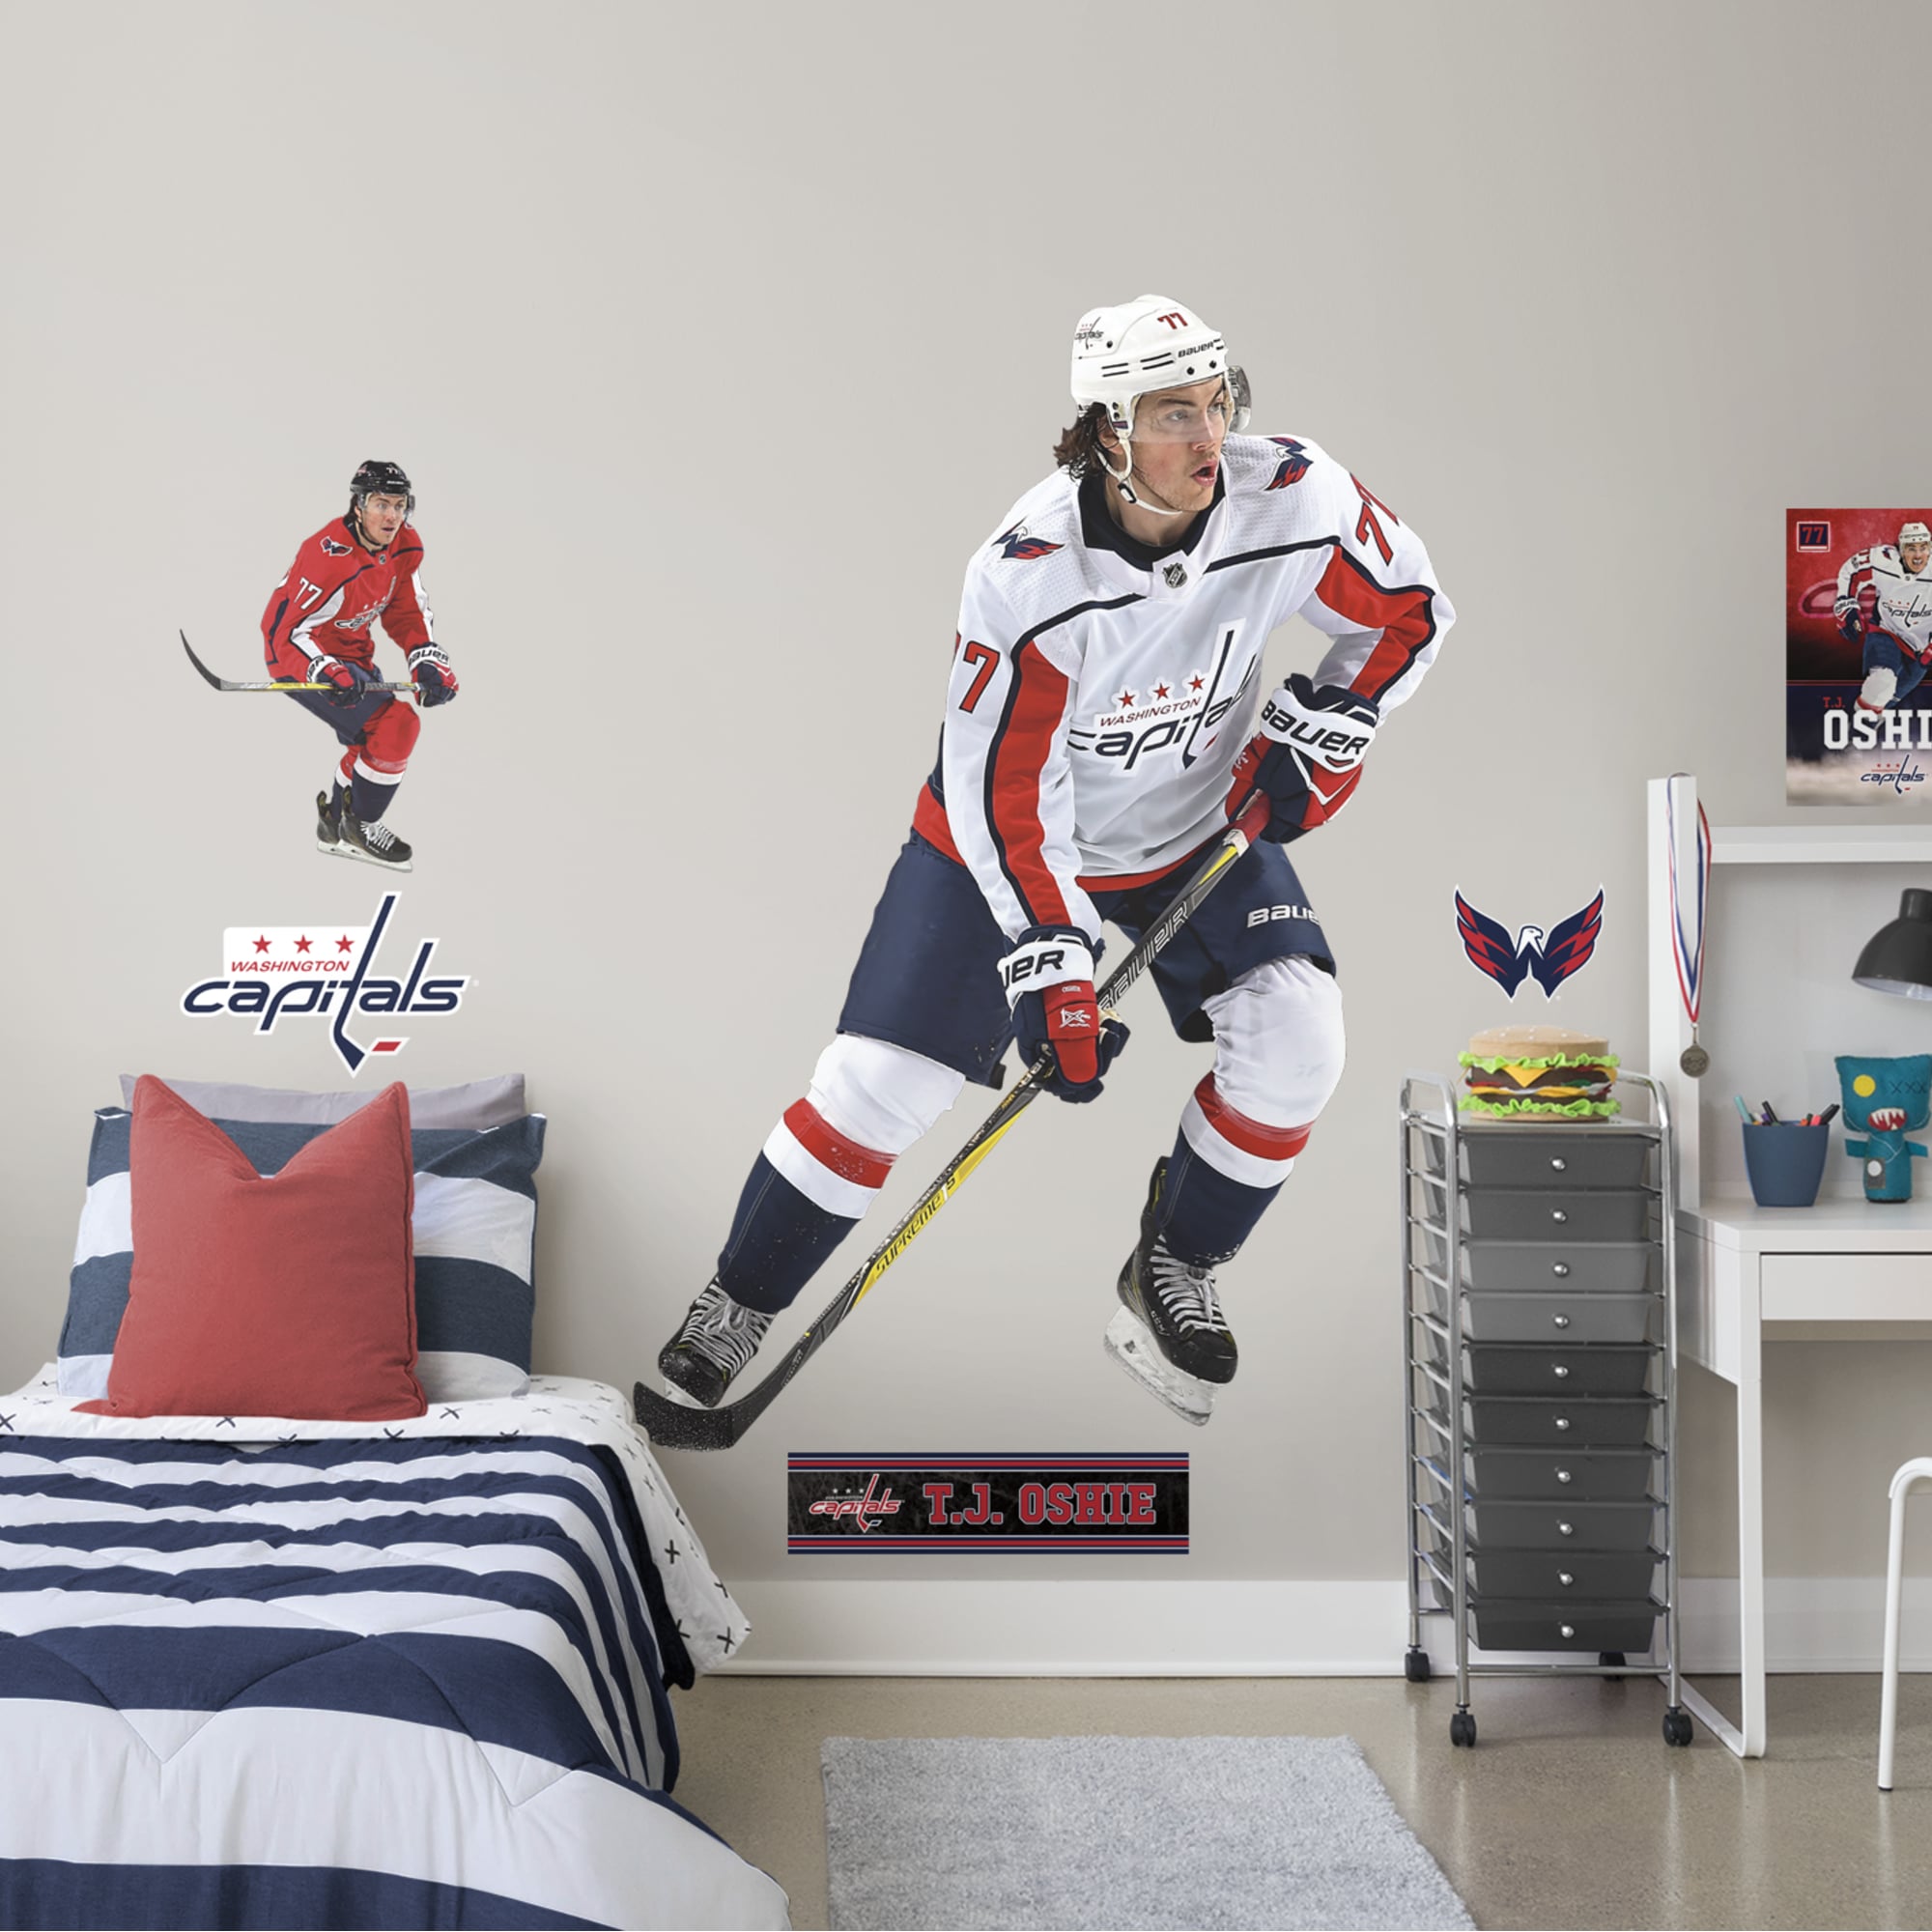 T.J. Oshie for Washington Capitals - Officially Licensed NHL Removable Wall Decal Life-Size Athlete + 9 Decals (52"W x 73"H) by